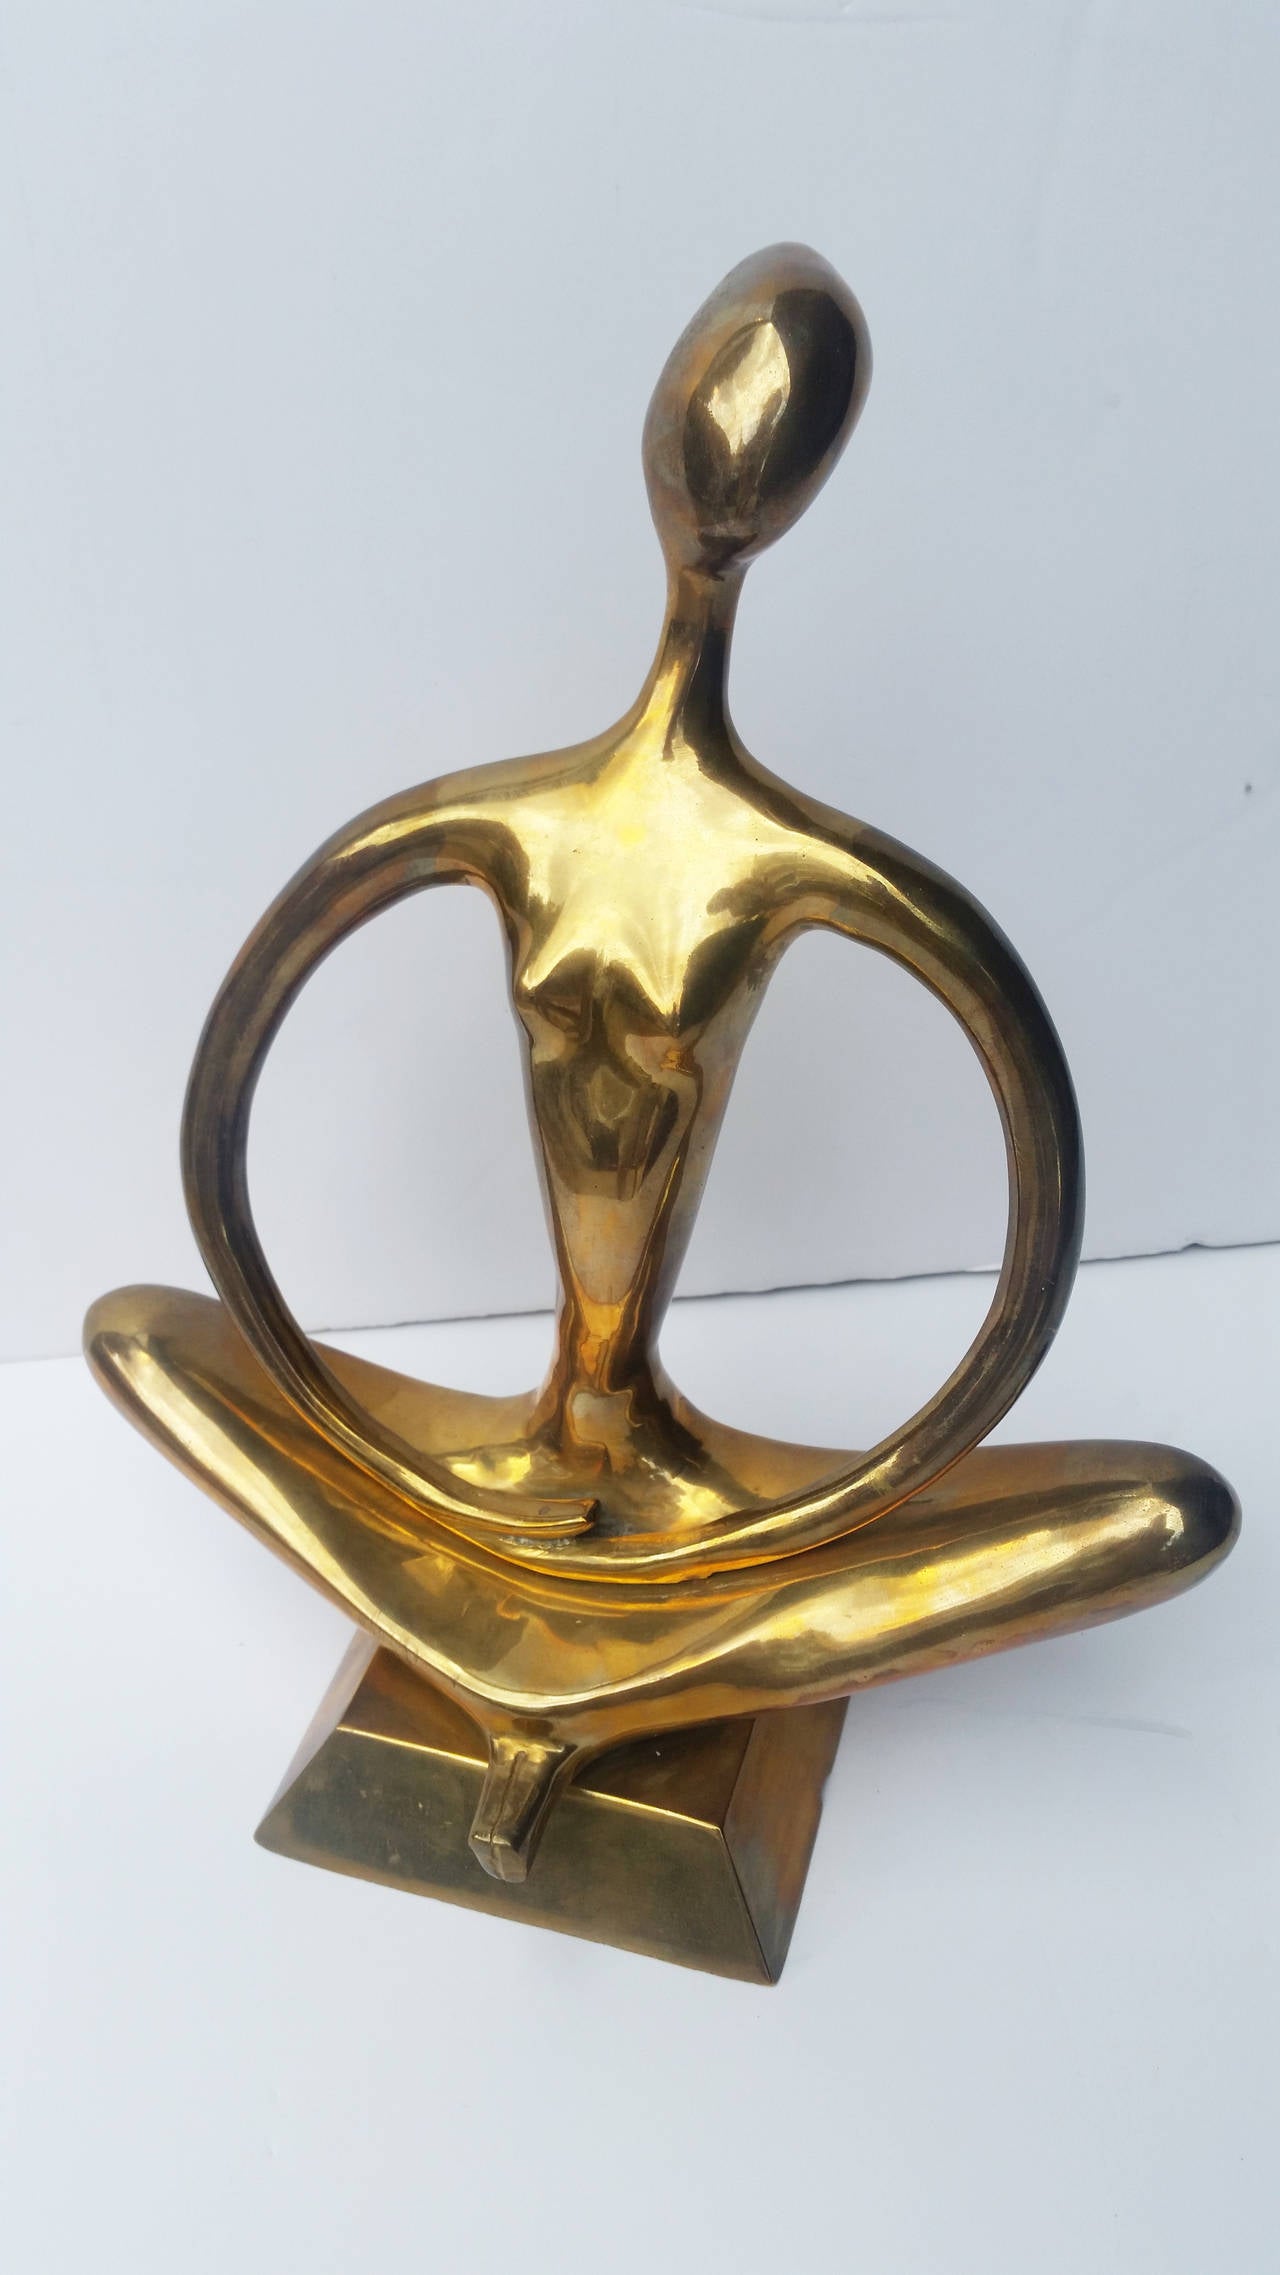 An organic brass mid-century sculpture of a woman
in the Classic Lotus pose. Great from all angles.
The art sits on a raised brass base with beveled edges.